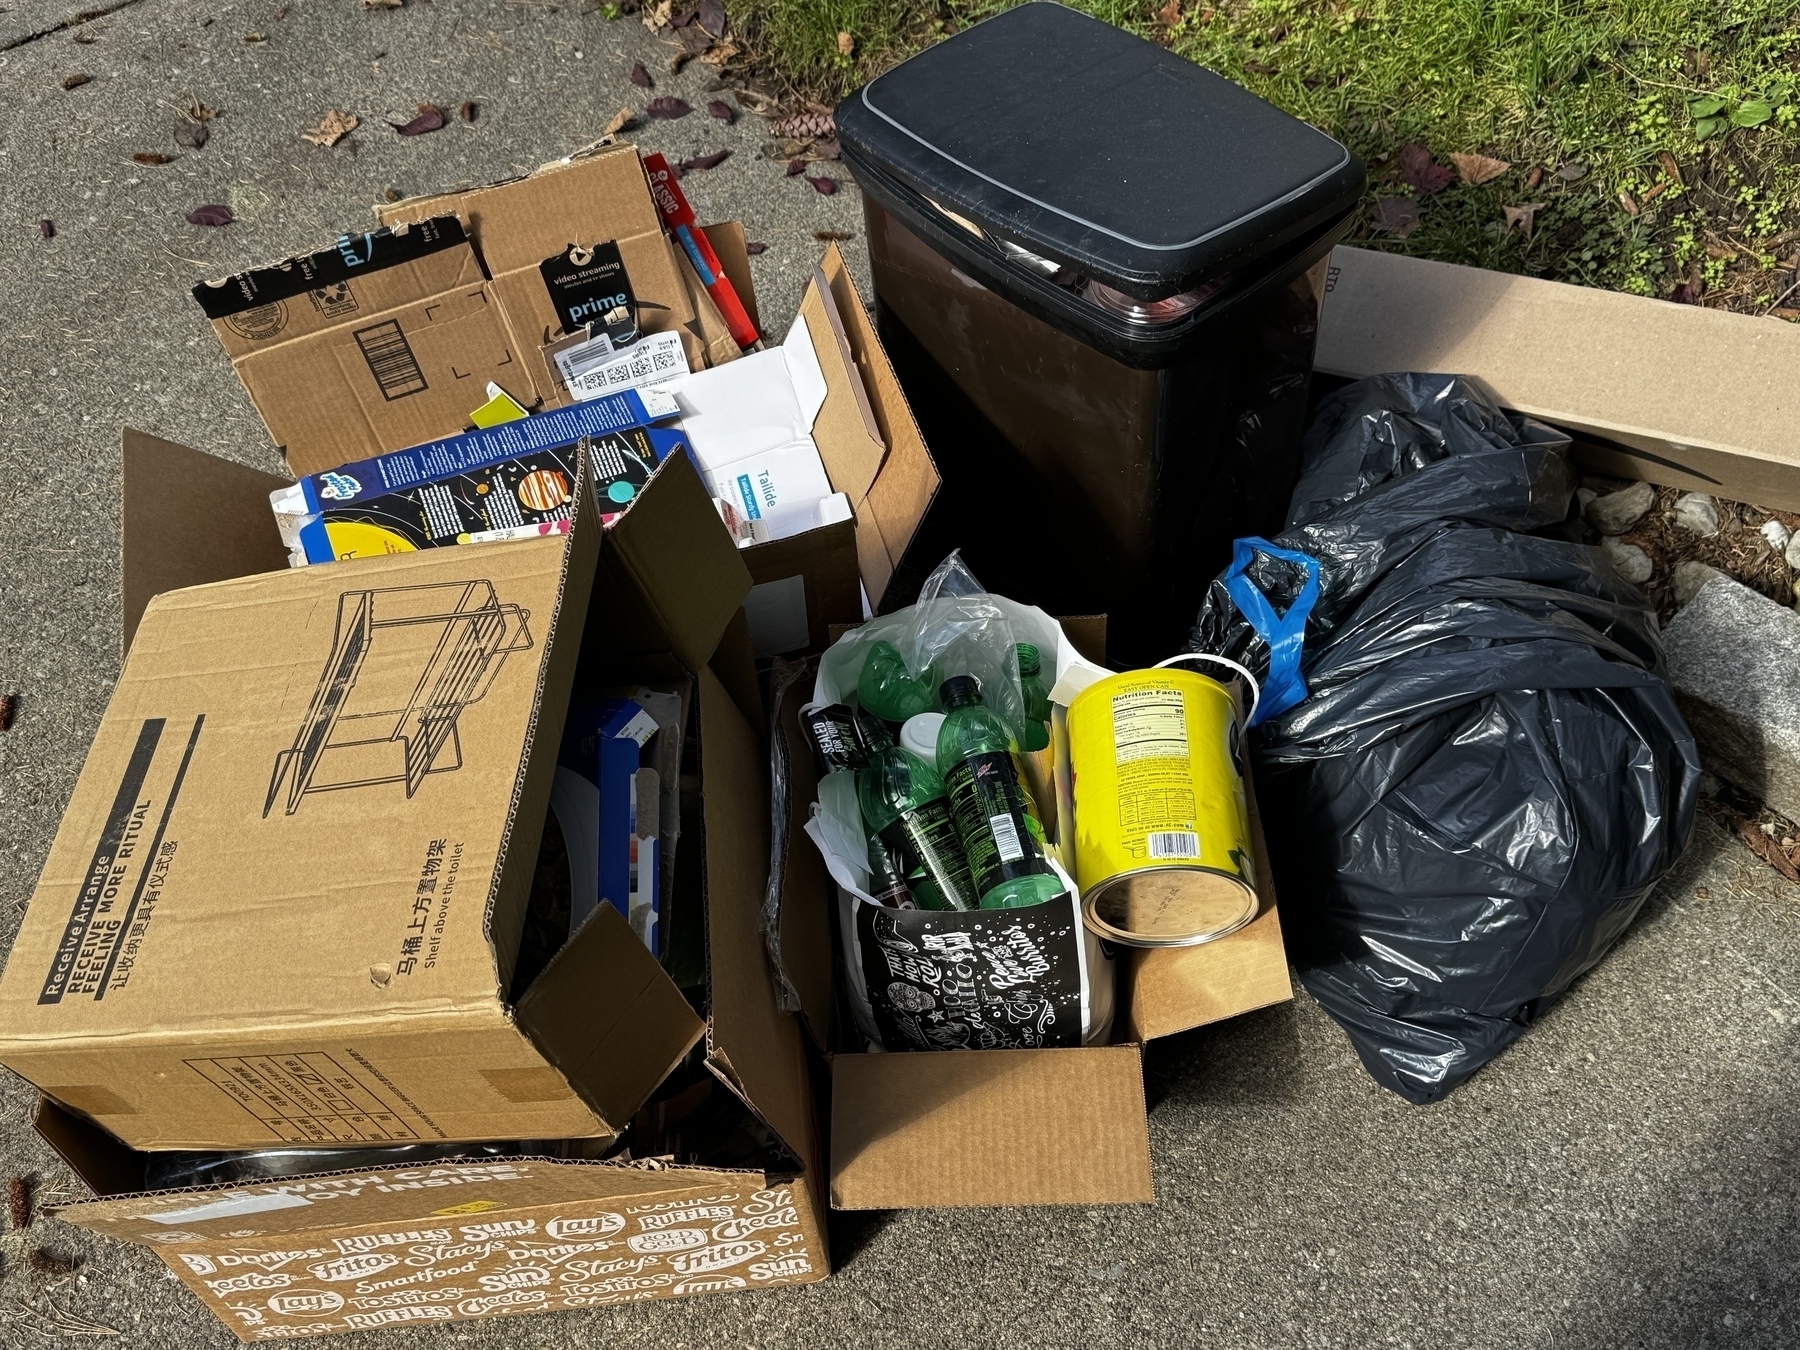 Piles of recycling and a garbage bag and cardboard boxes filled with containers outside in the day time on concrete. 